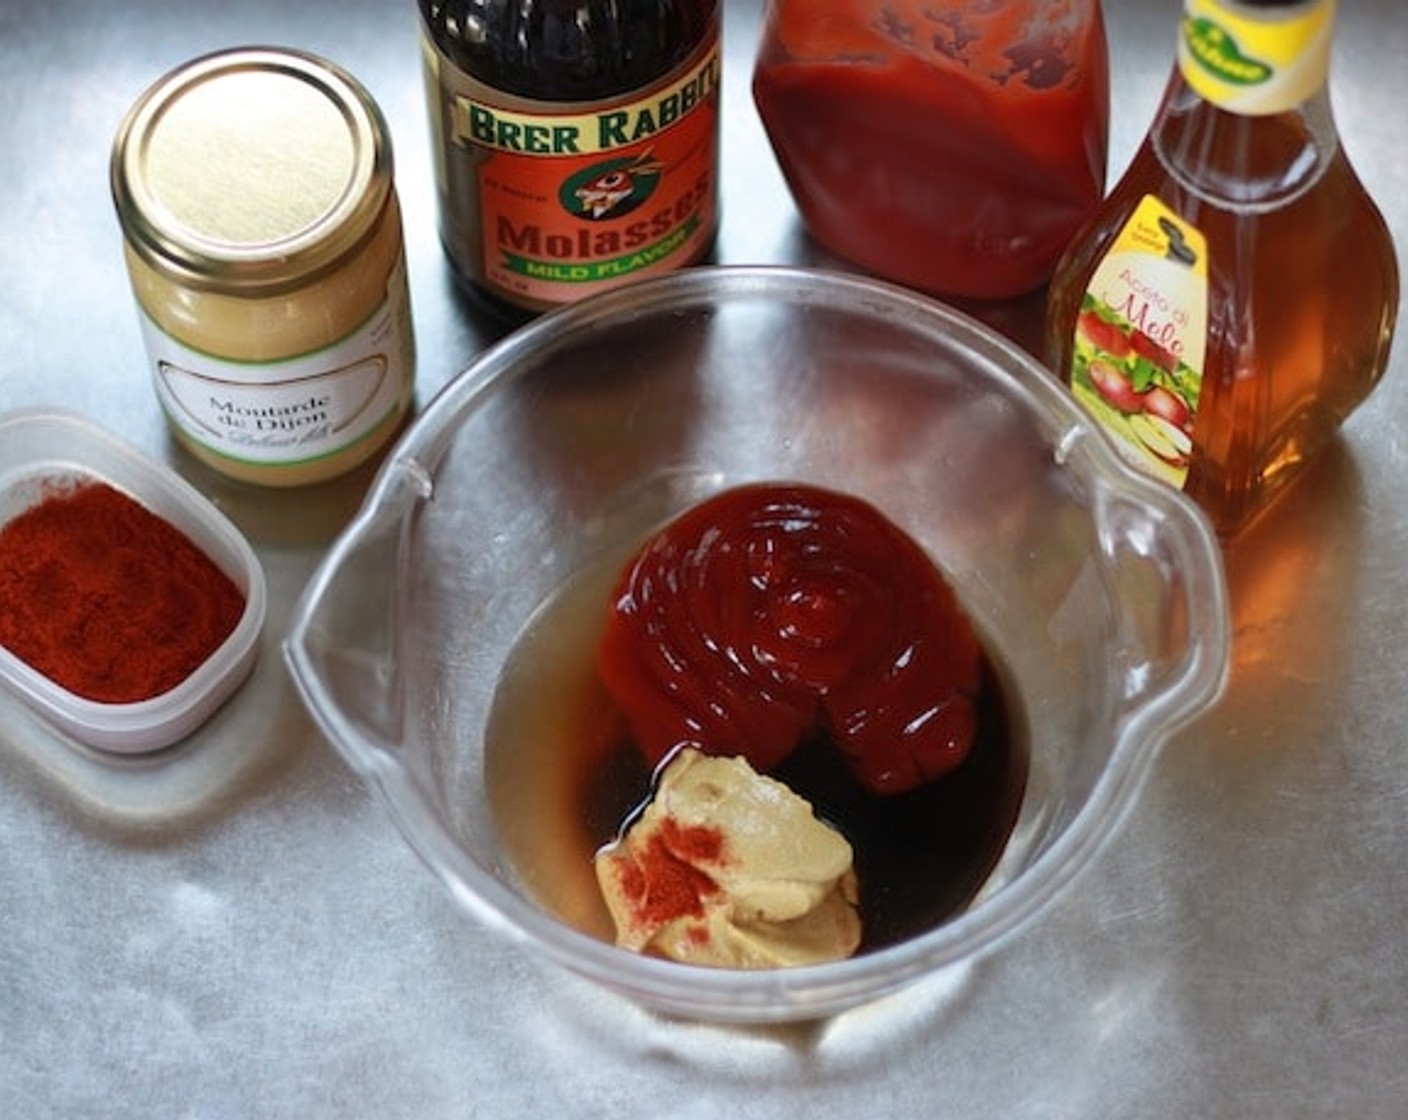 step 11 While waiting for your Neatloaf to bake. Prepare the Ketchup (1 cup), Yellow Mustard (1/4 cup), Molasses (1/4 cup), Apple Cider Vinegar (1/4 cup), and Cayenne Pepper (1/2 Tbsp).